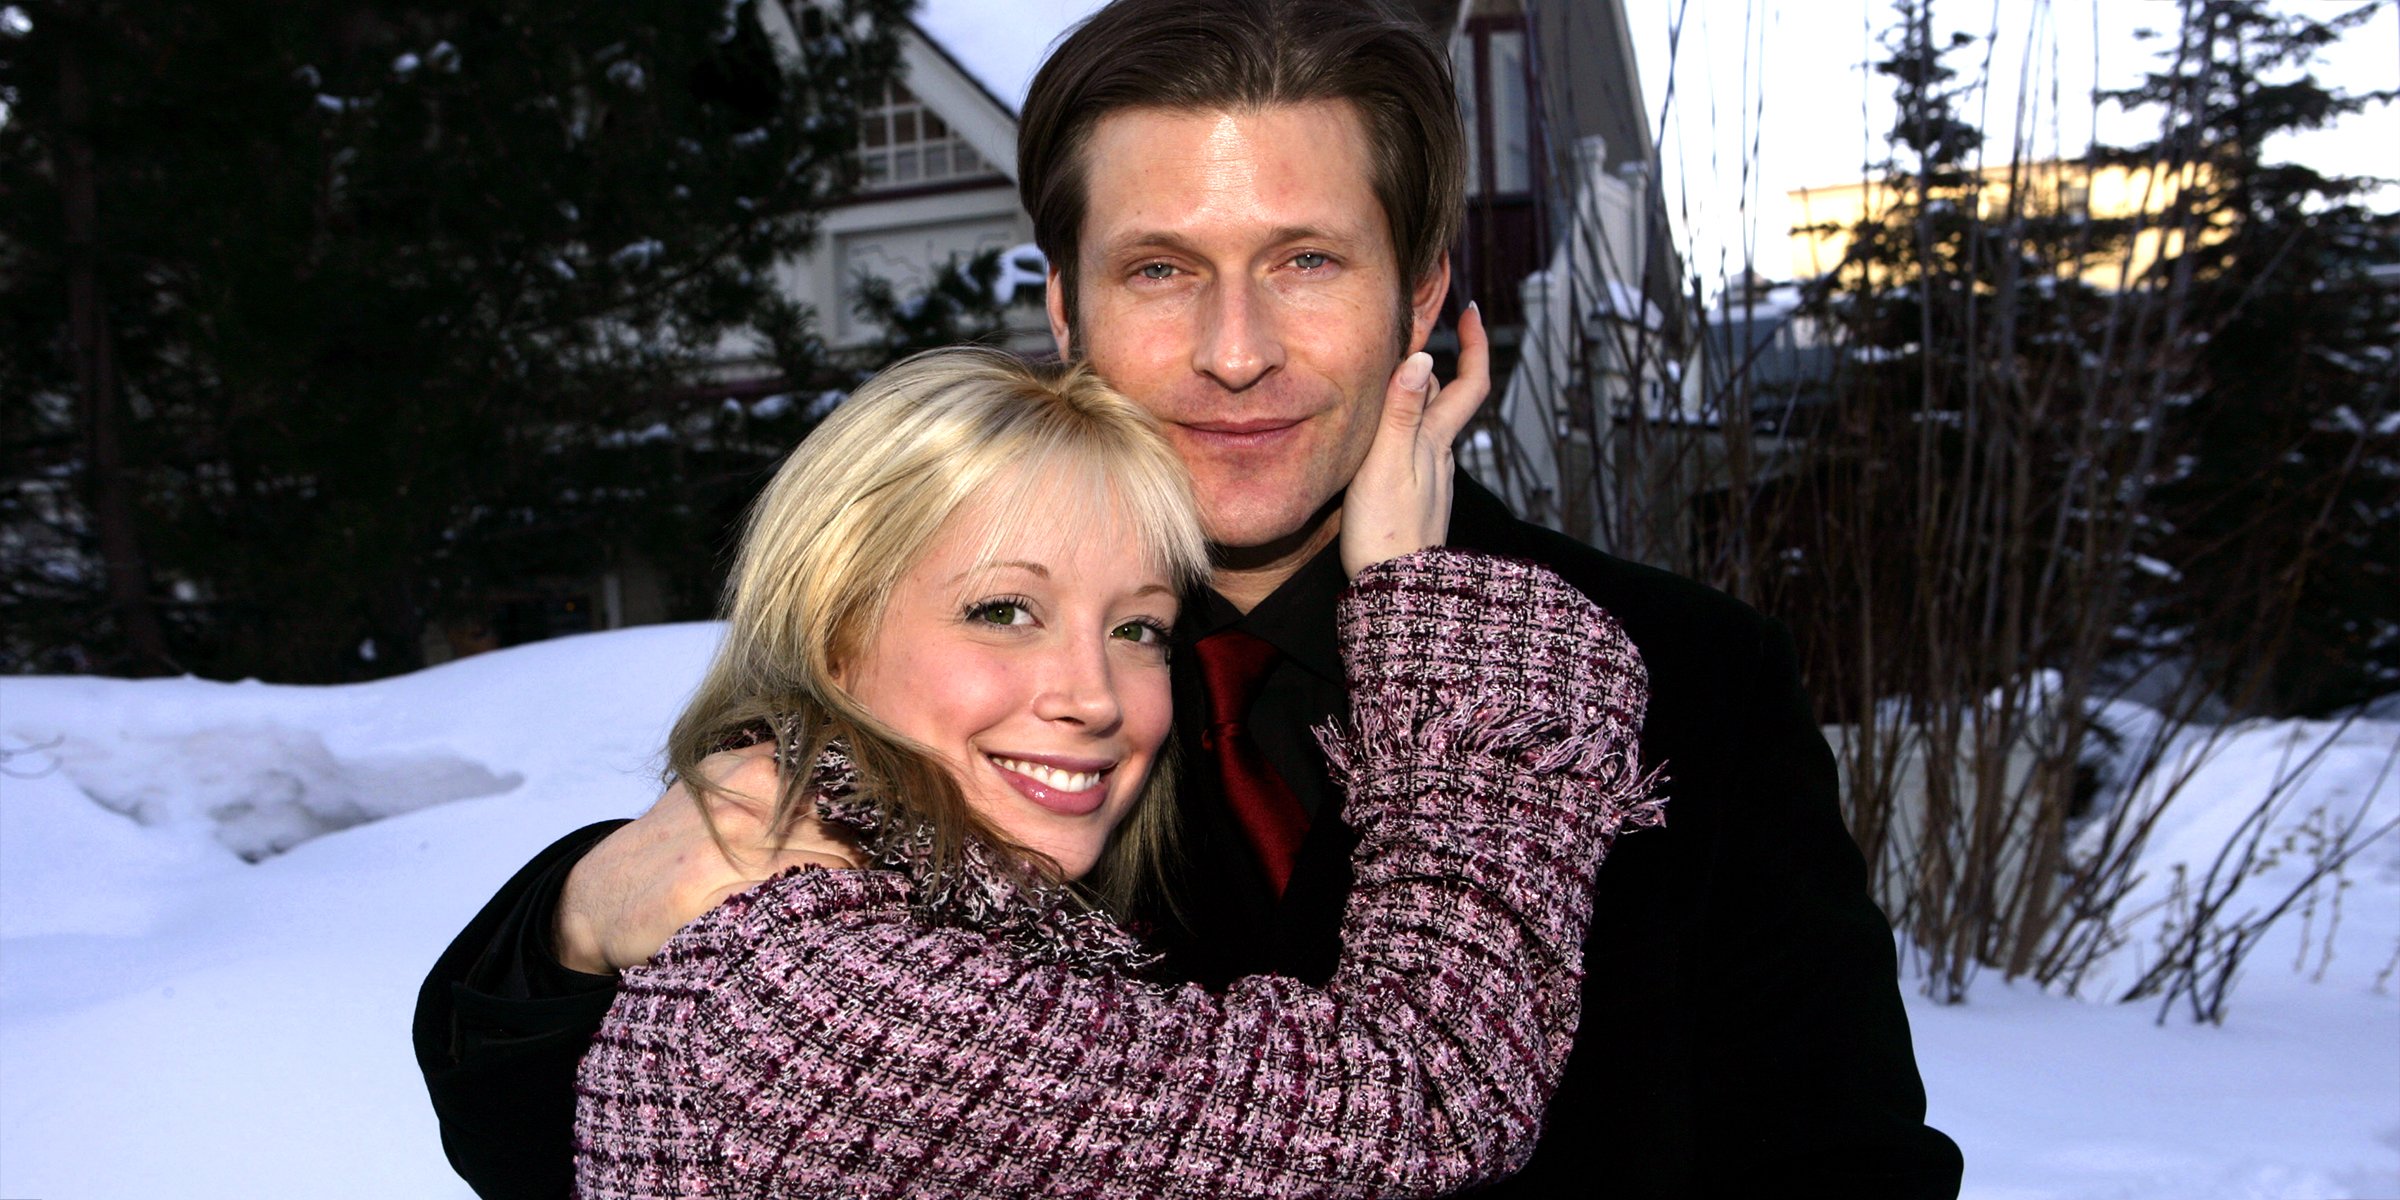 Courtney Peldon and Crispin Glover. | Source: Getty Images